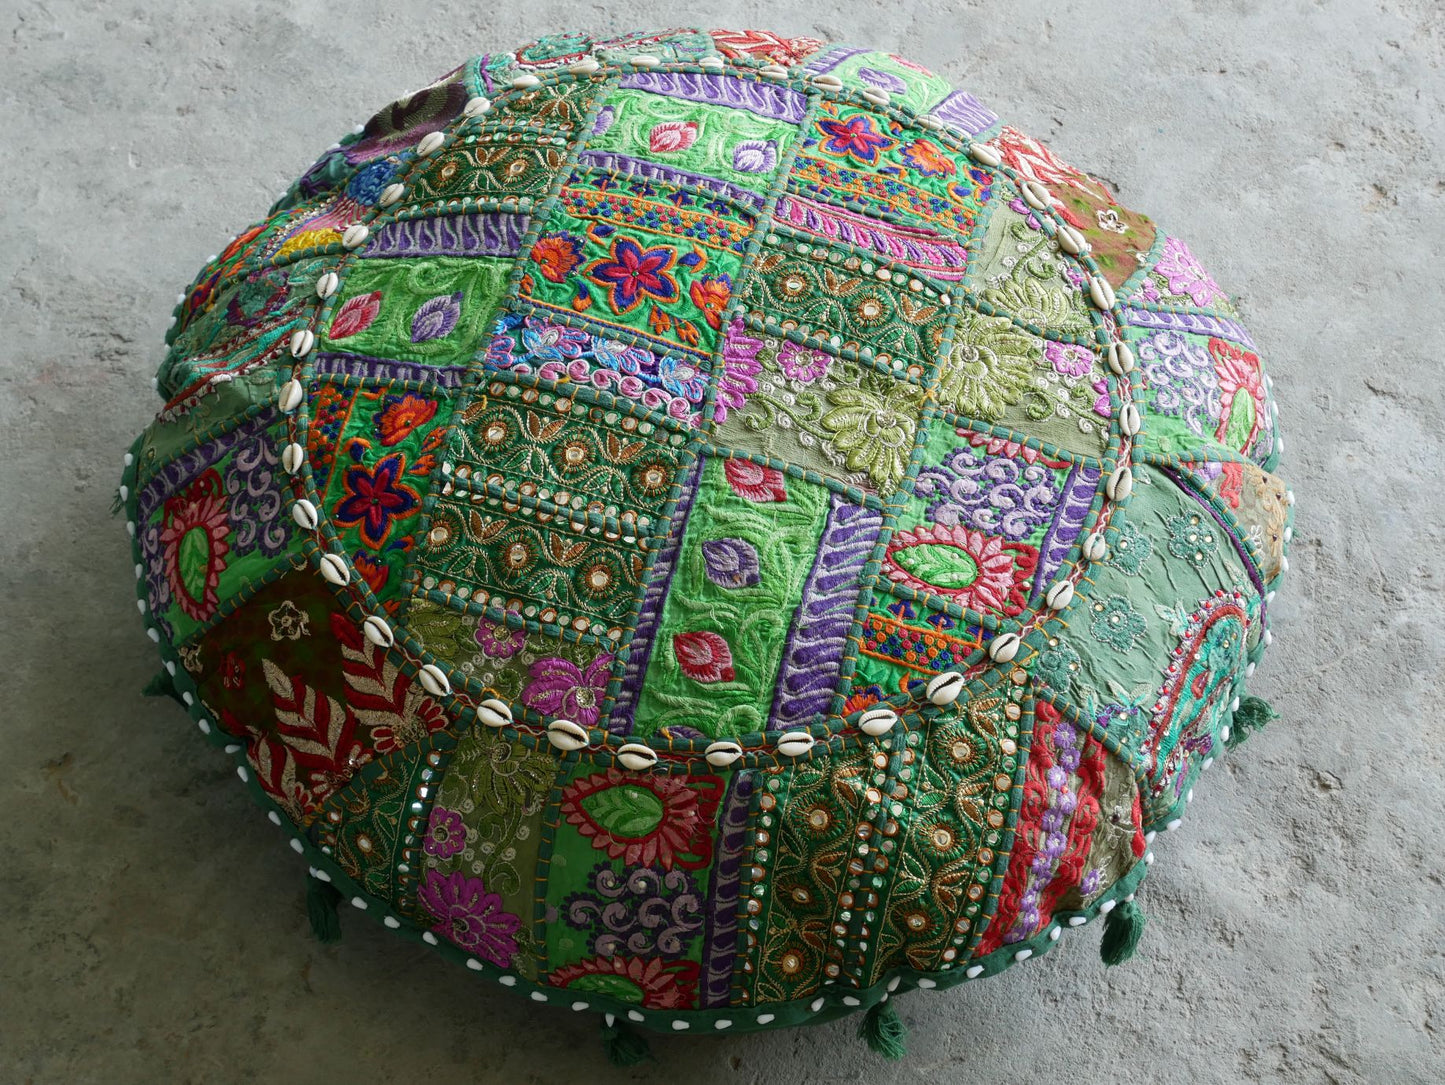 Floor pillow "Boho Jungle" large floor cushion cover or meditation cushion (cover only)